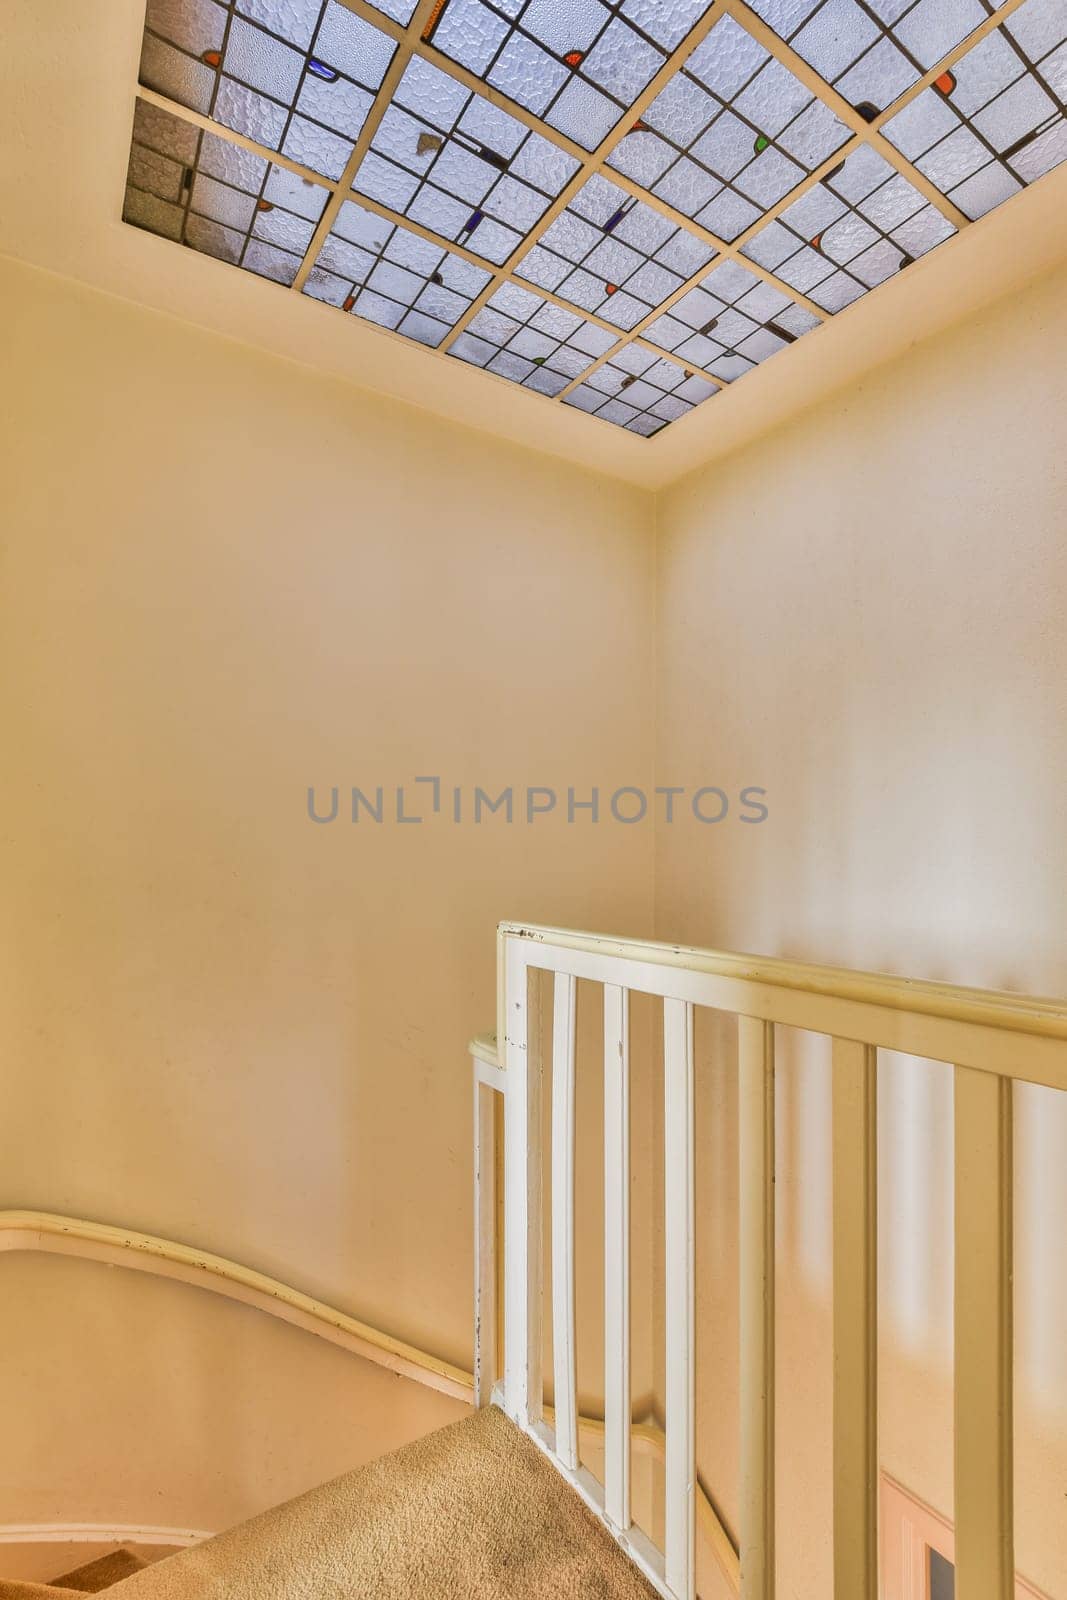 the inside of a room with a skylight above it and stairs leading up to the second floor in an apartment